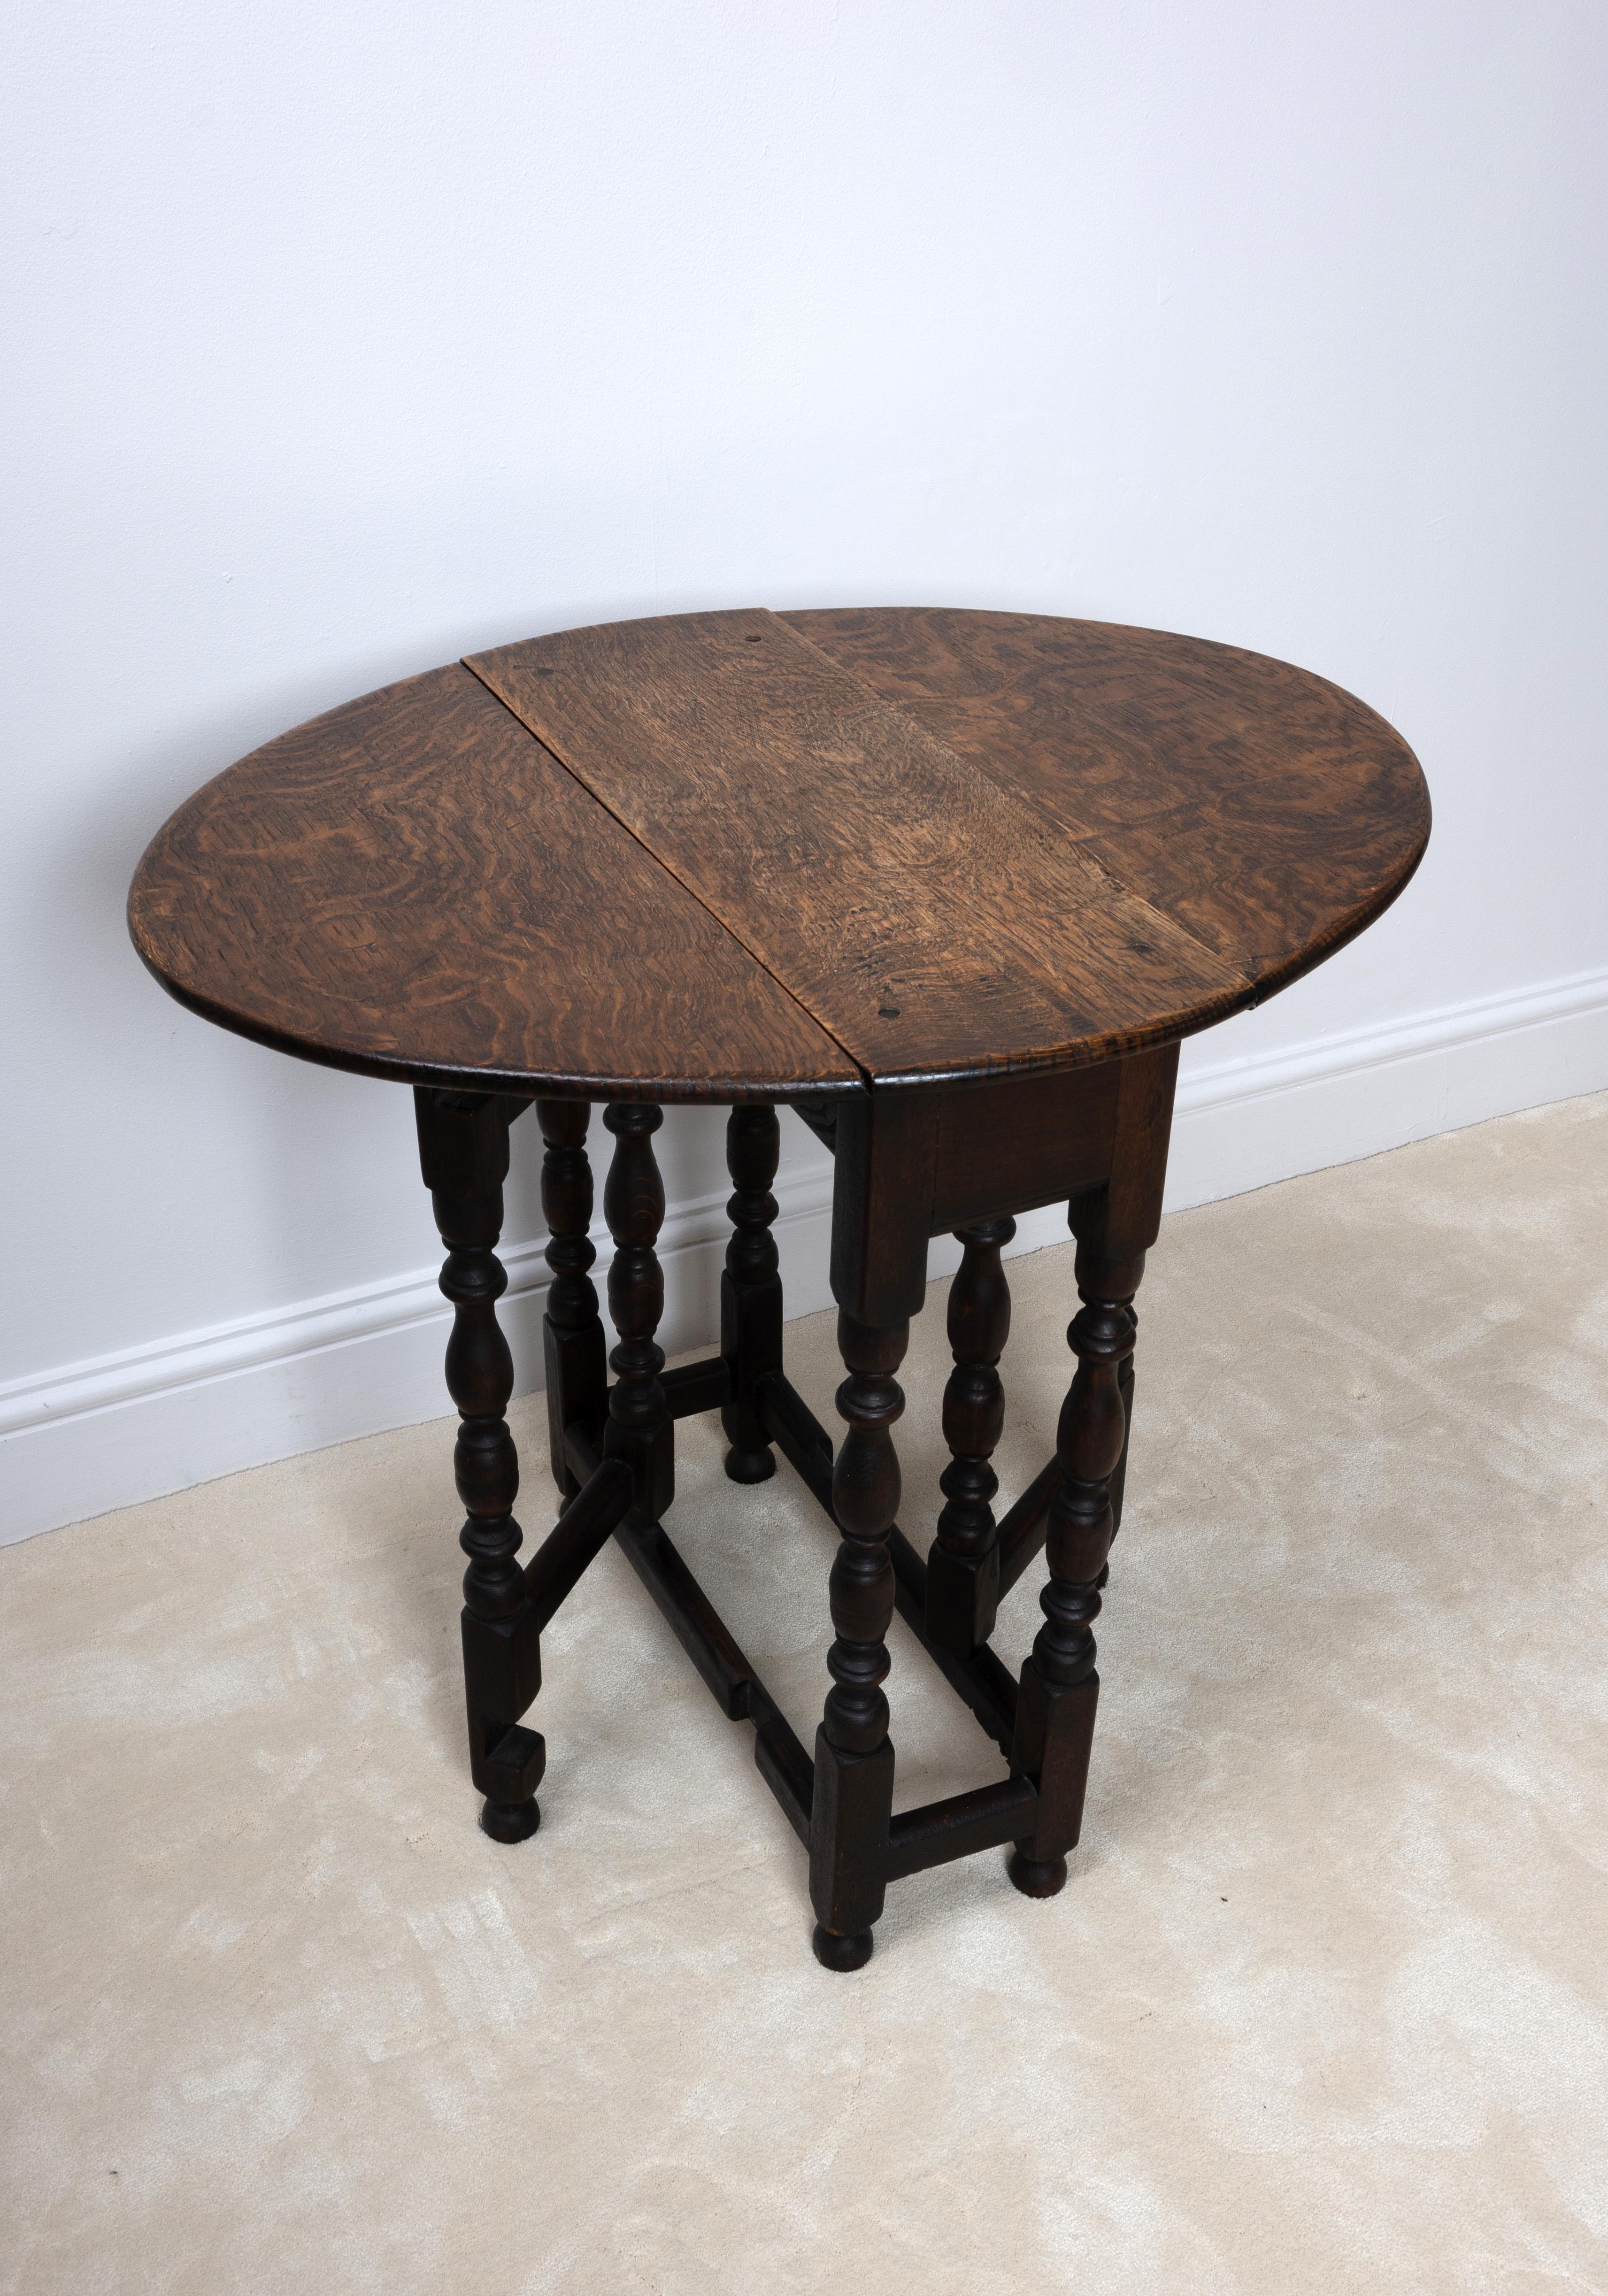 Small Oak 17th Century Style Gate Leg Drop Leaf Table 
C.1920
Ideal for many uses (Side, end, window, supper table)
Very compact in size when closed.
In very good condition commensurate of age.

Dimensions:
H:68cm
D58cm
L:22/73cm